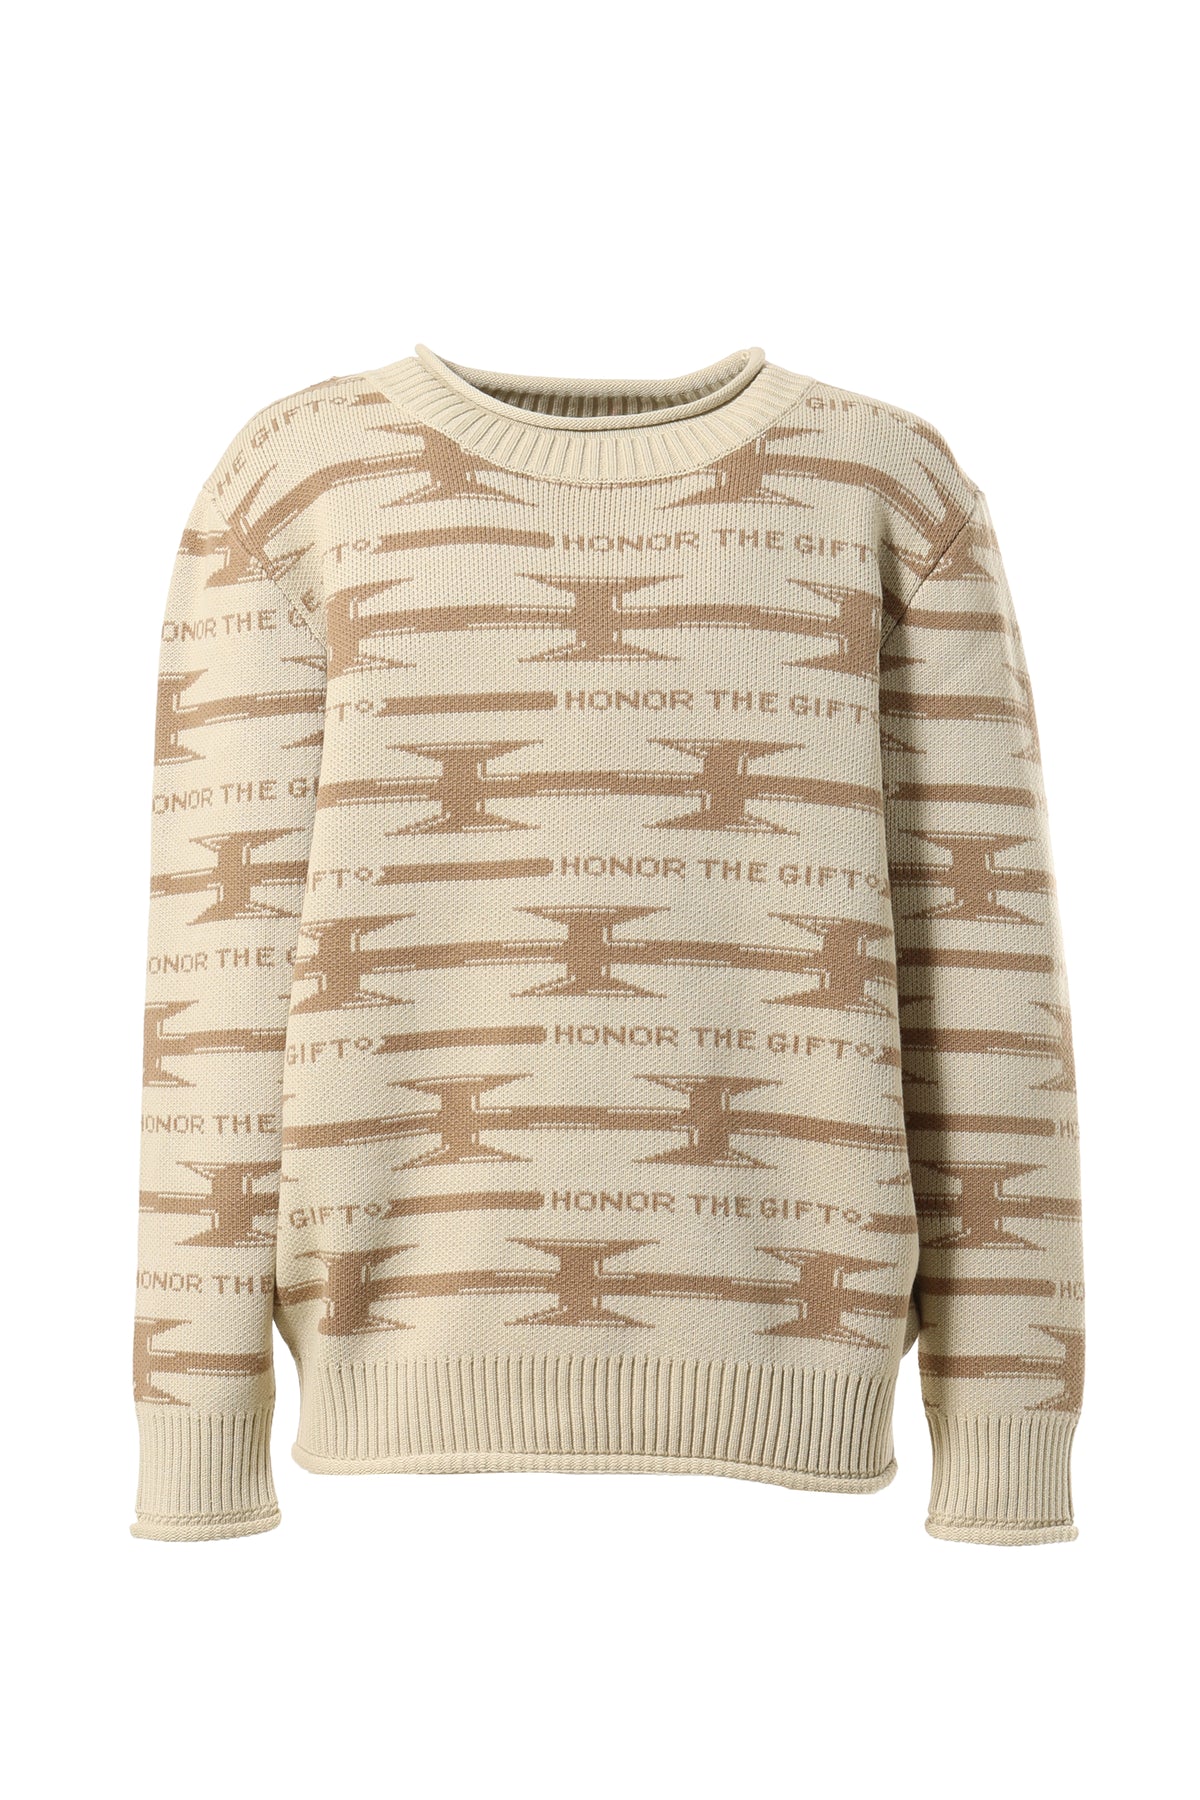 HONOR THE GIFT オナーザギフト FW23 H WIRE KNIT SWEATER / BONE -NUBIAN